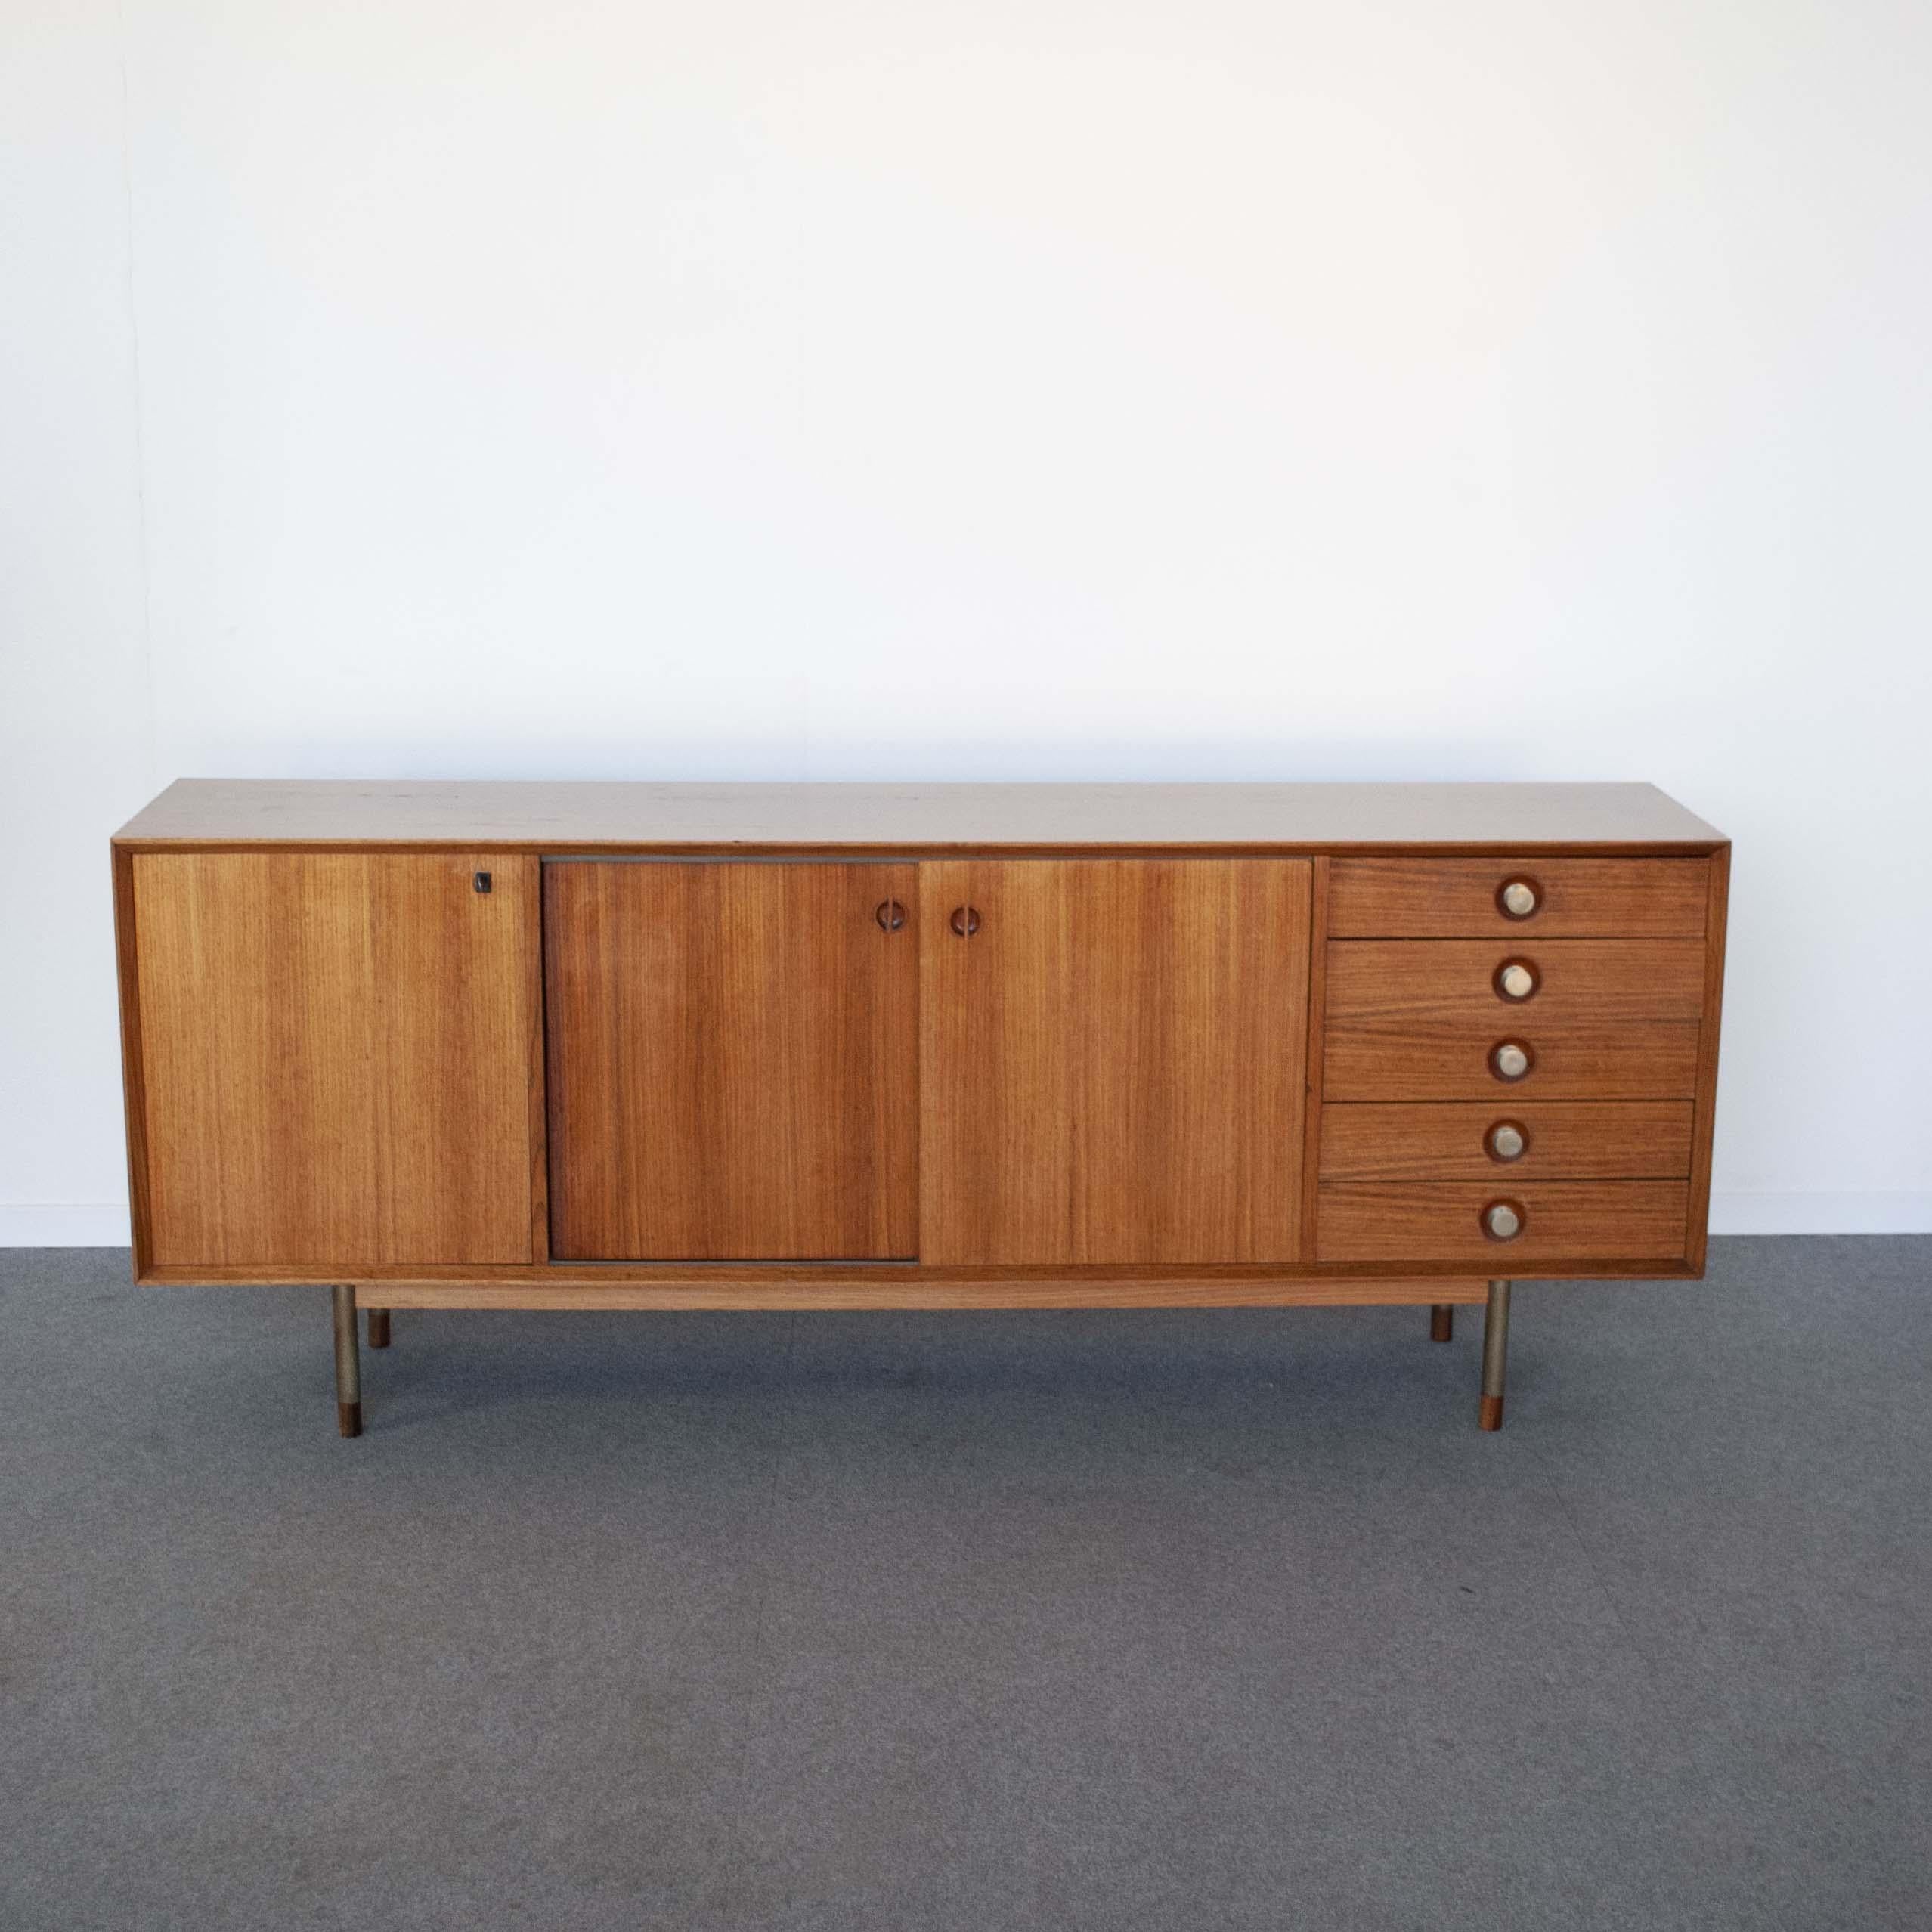 Georges Nelson in the Manner Sideboard in Walnut from the Sixties For Sale 4